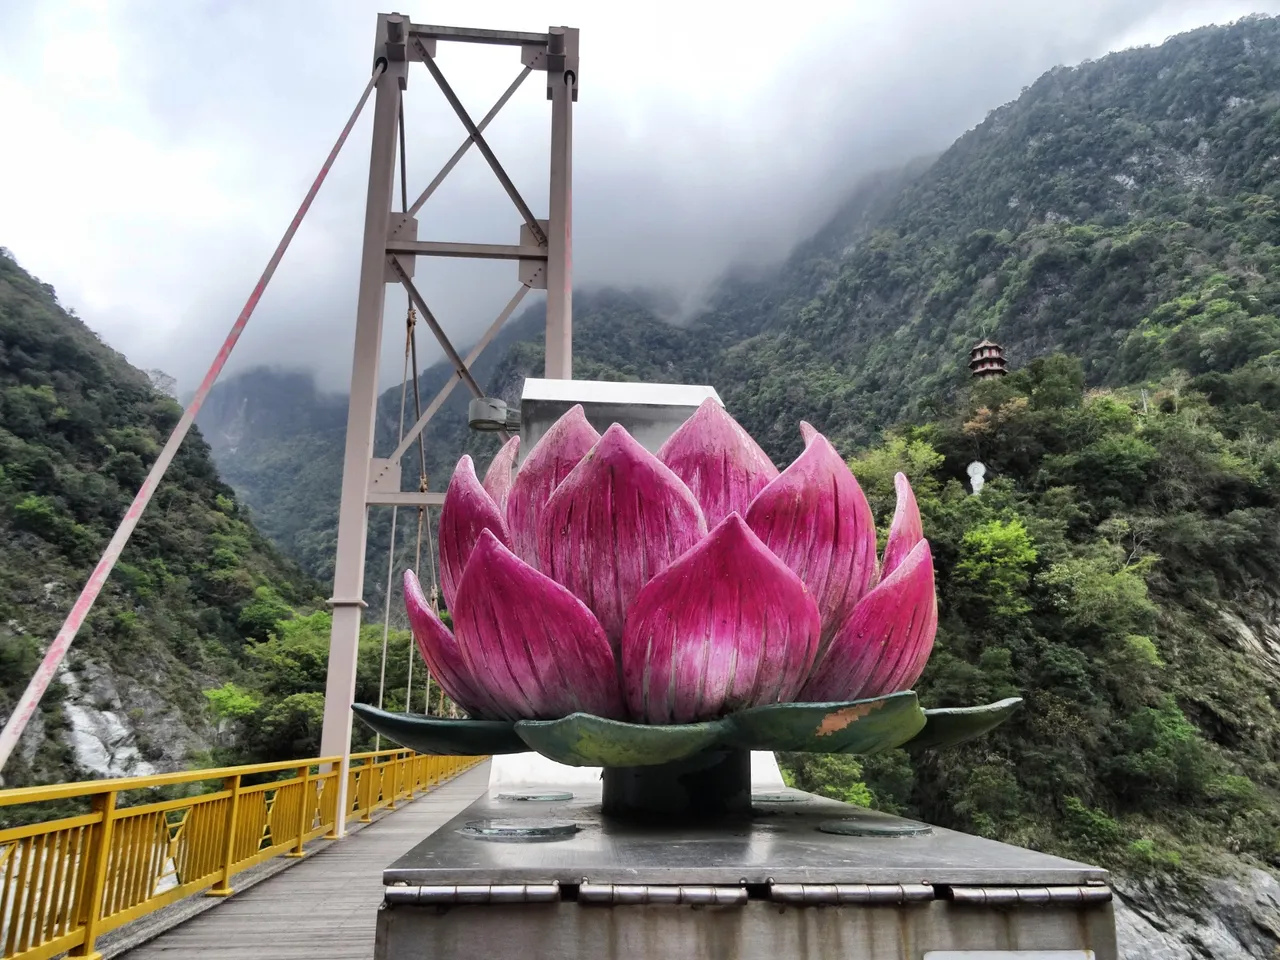 The brigde with a lotus bloom